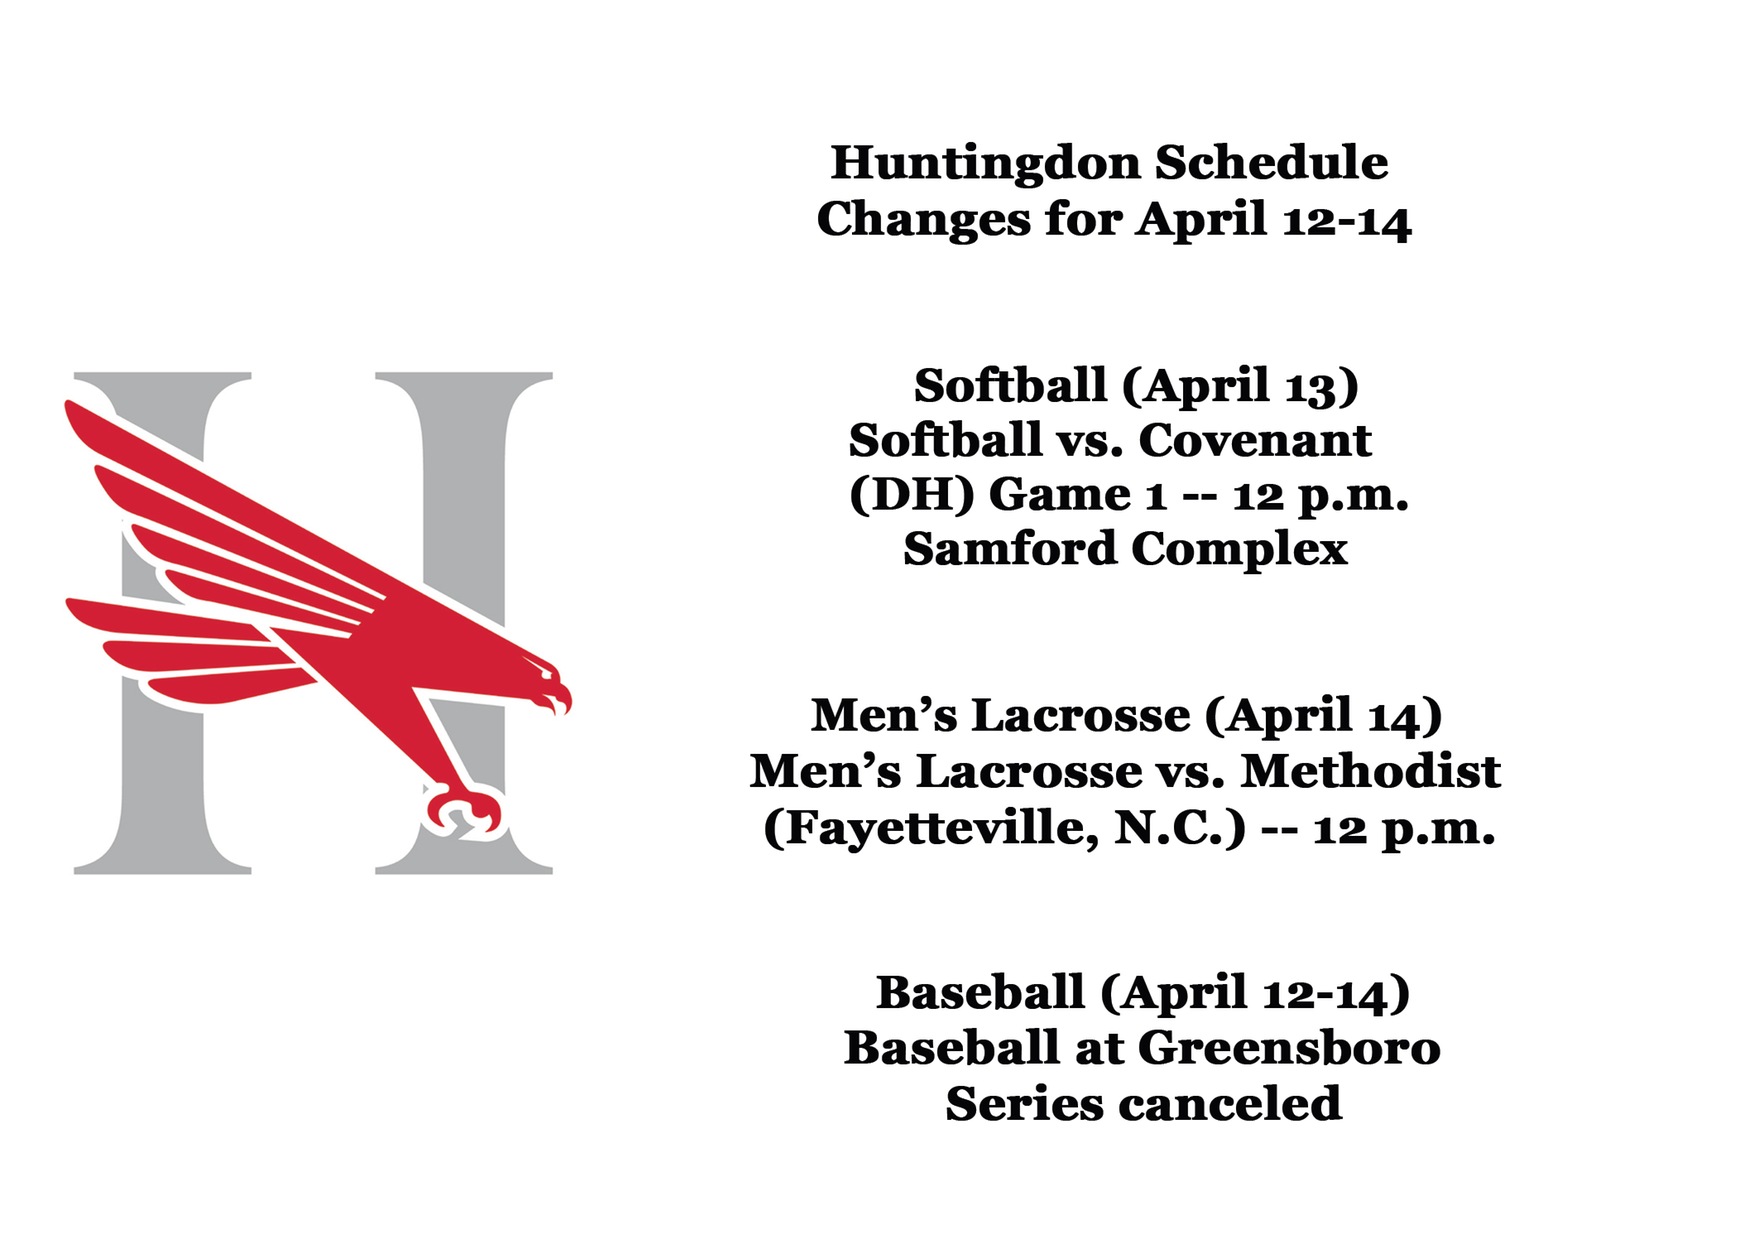 Weather forces changes for softball, baseball and men’s lacrosse